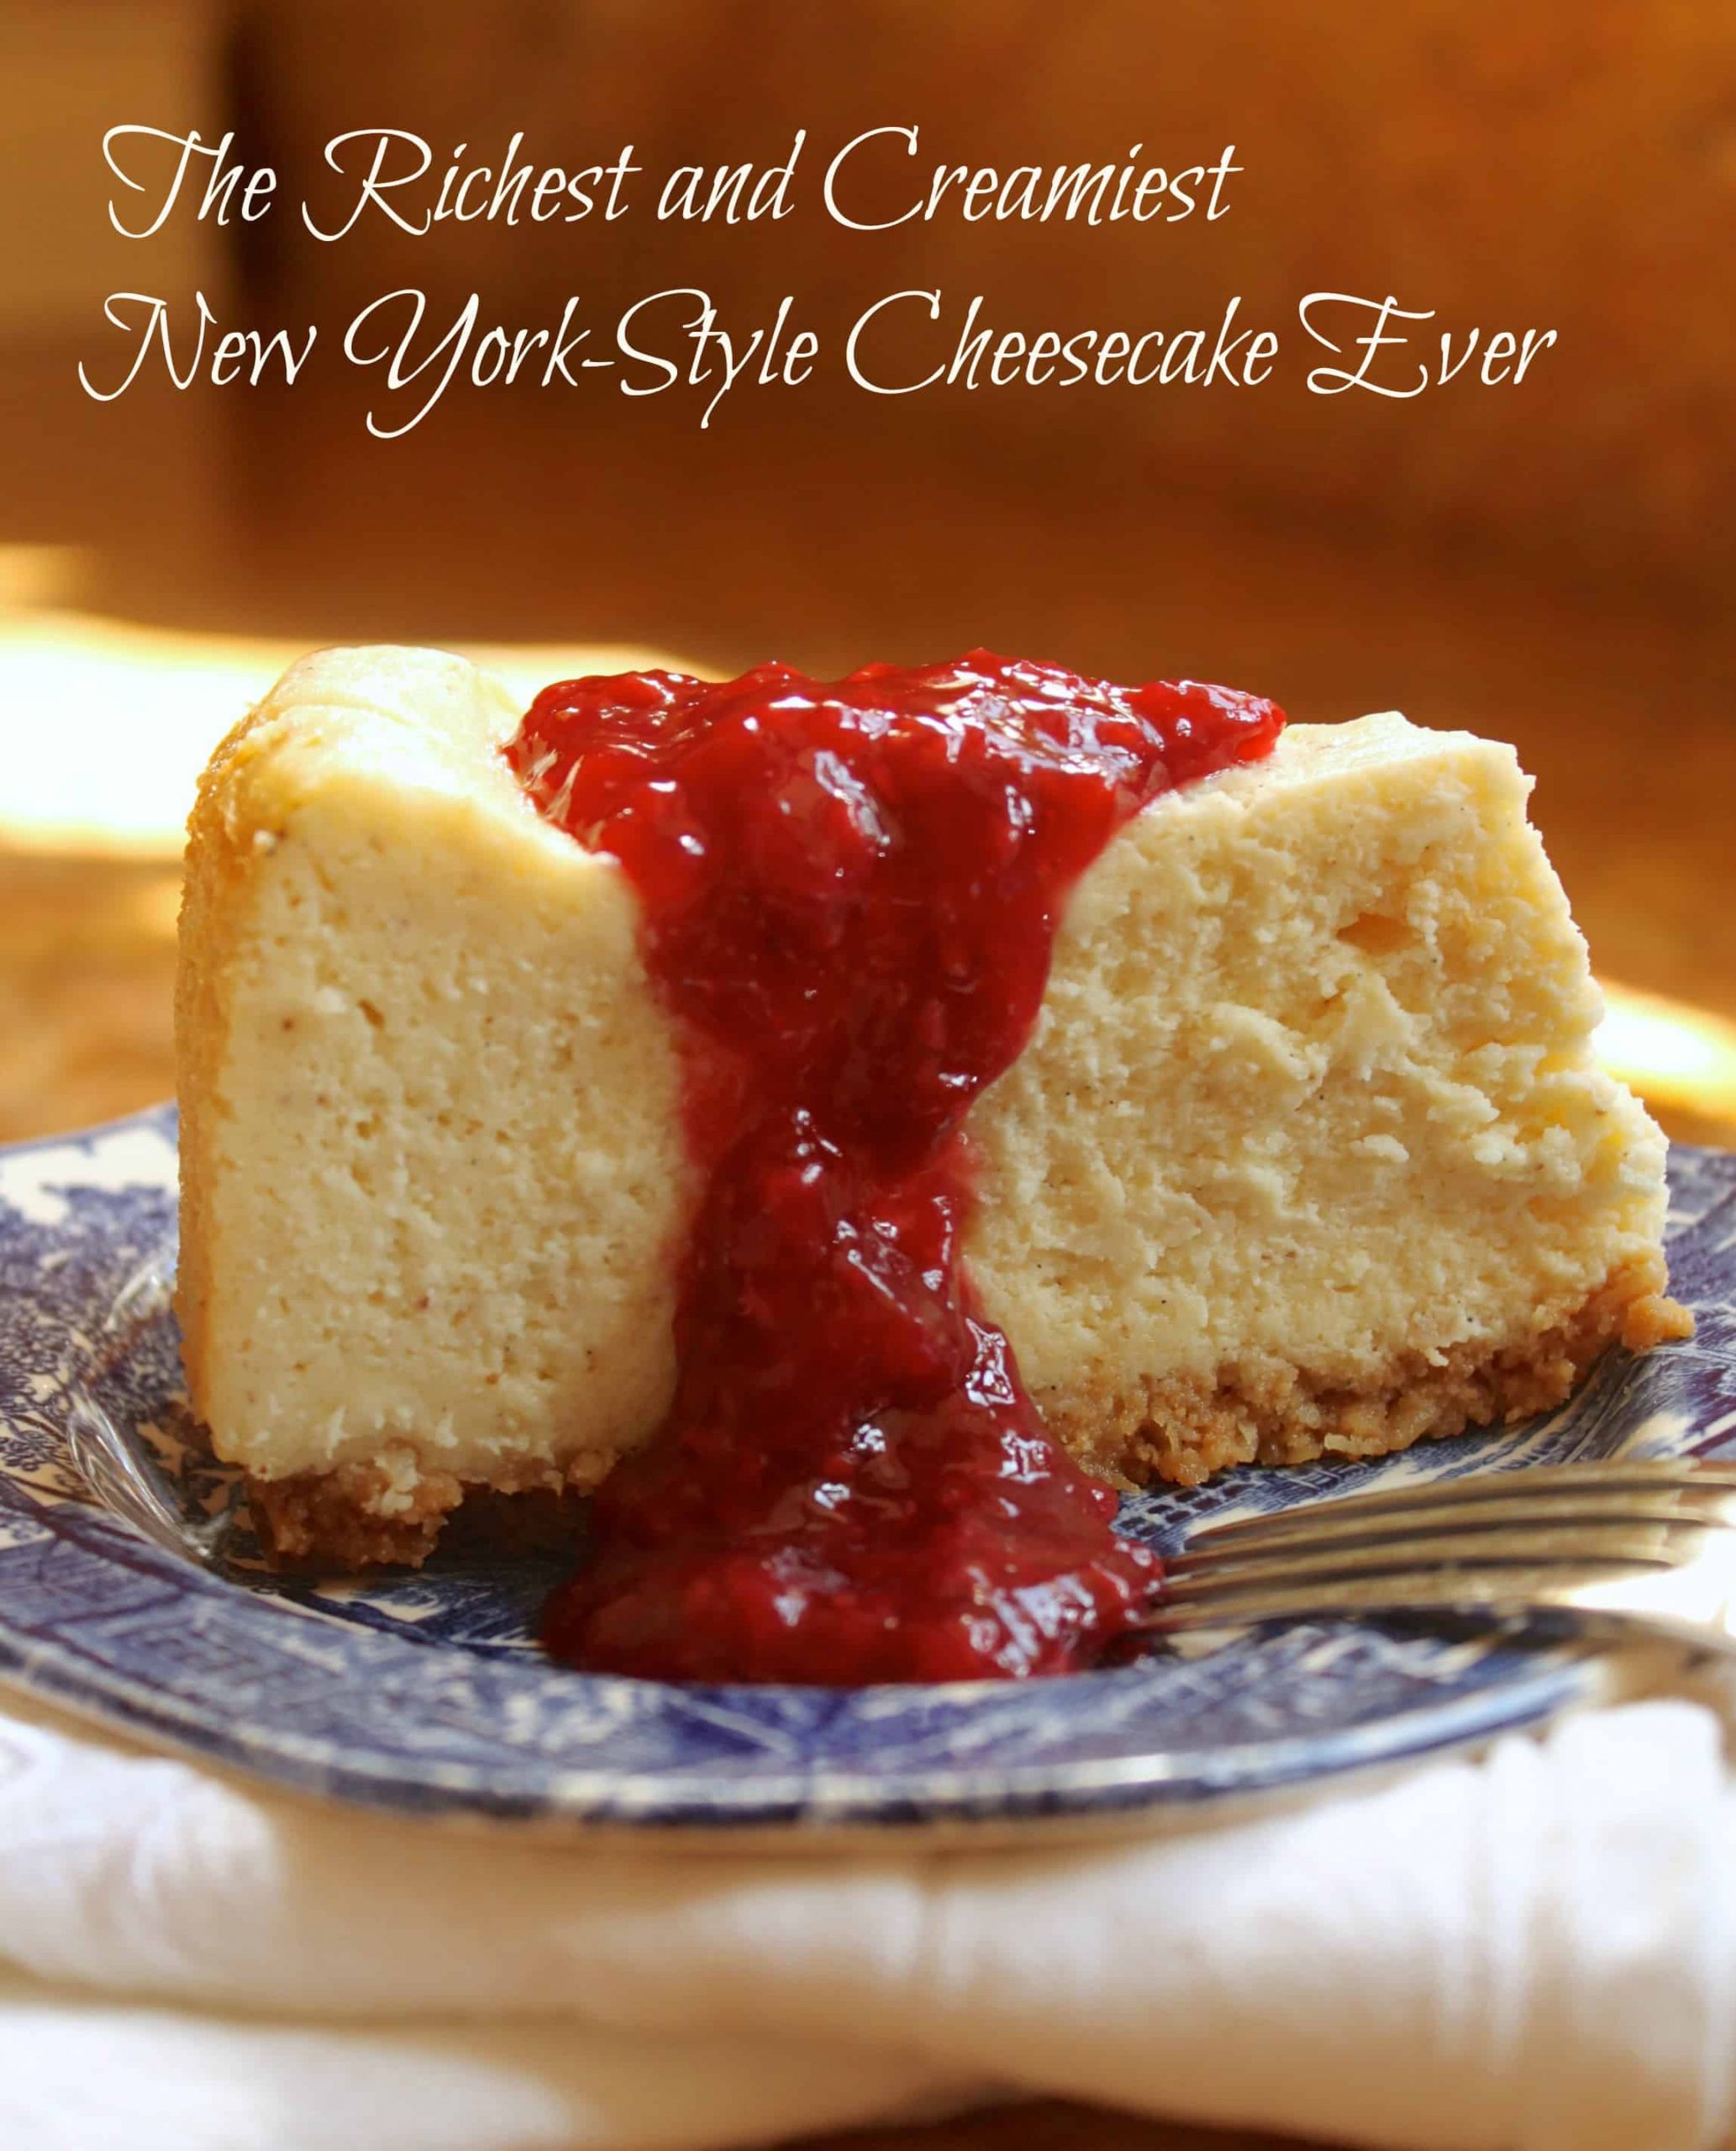 Ny Cheesecake Recipe
 The Richest and Creamiest New York Style Cheesecake I ve